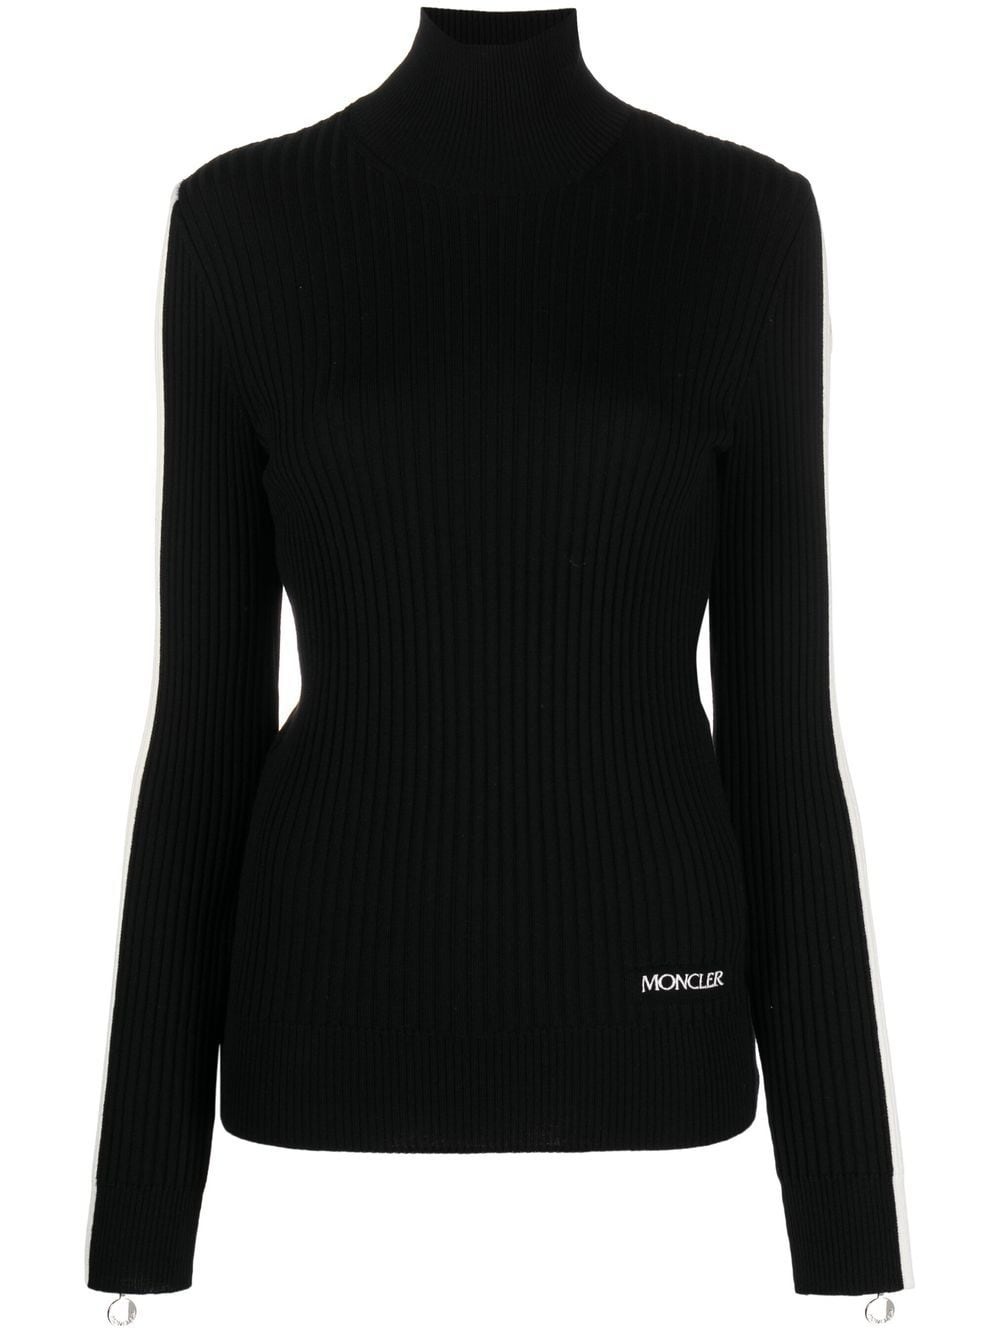 embroidered-logo funnel neck top - 1